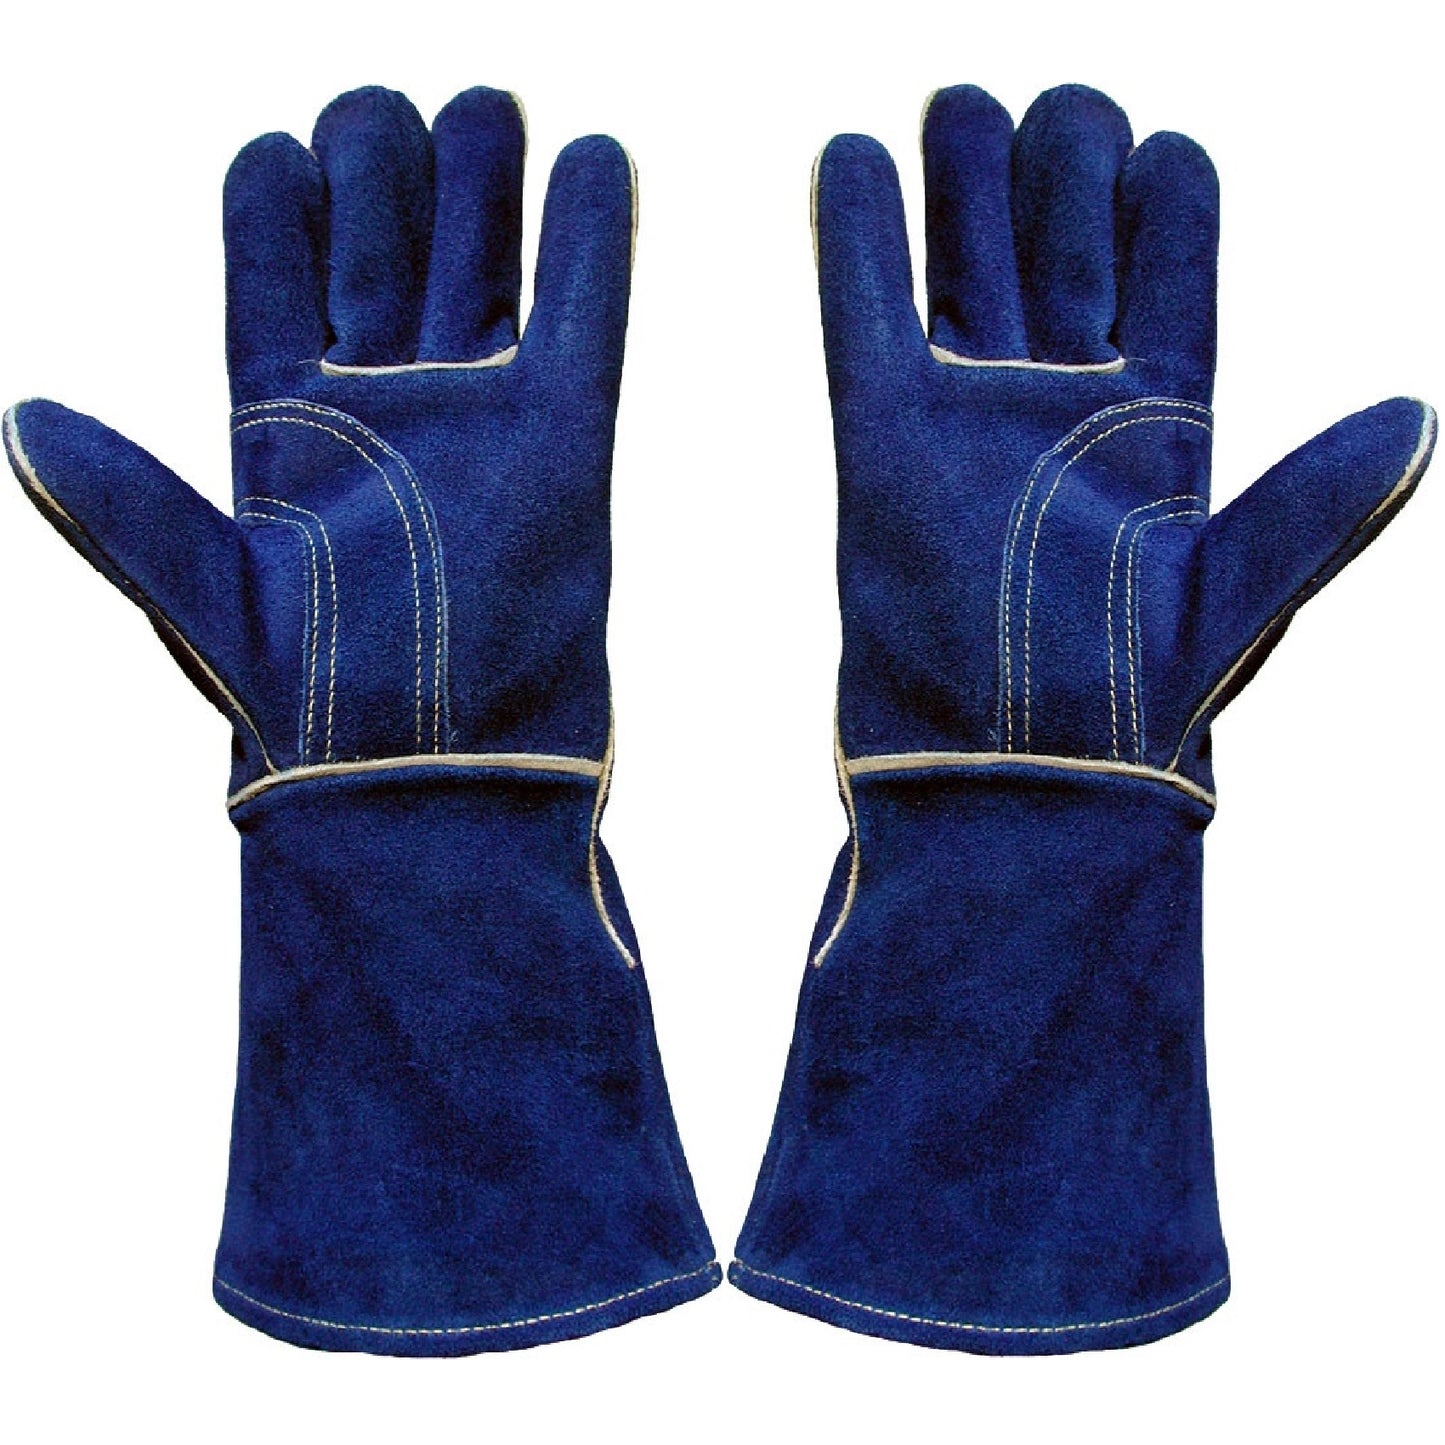 Pair Somerfire Blue Double Palm Heat Resistant Stove Gloves